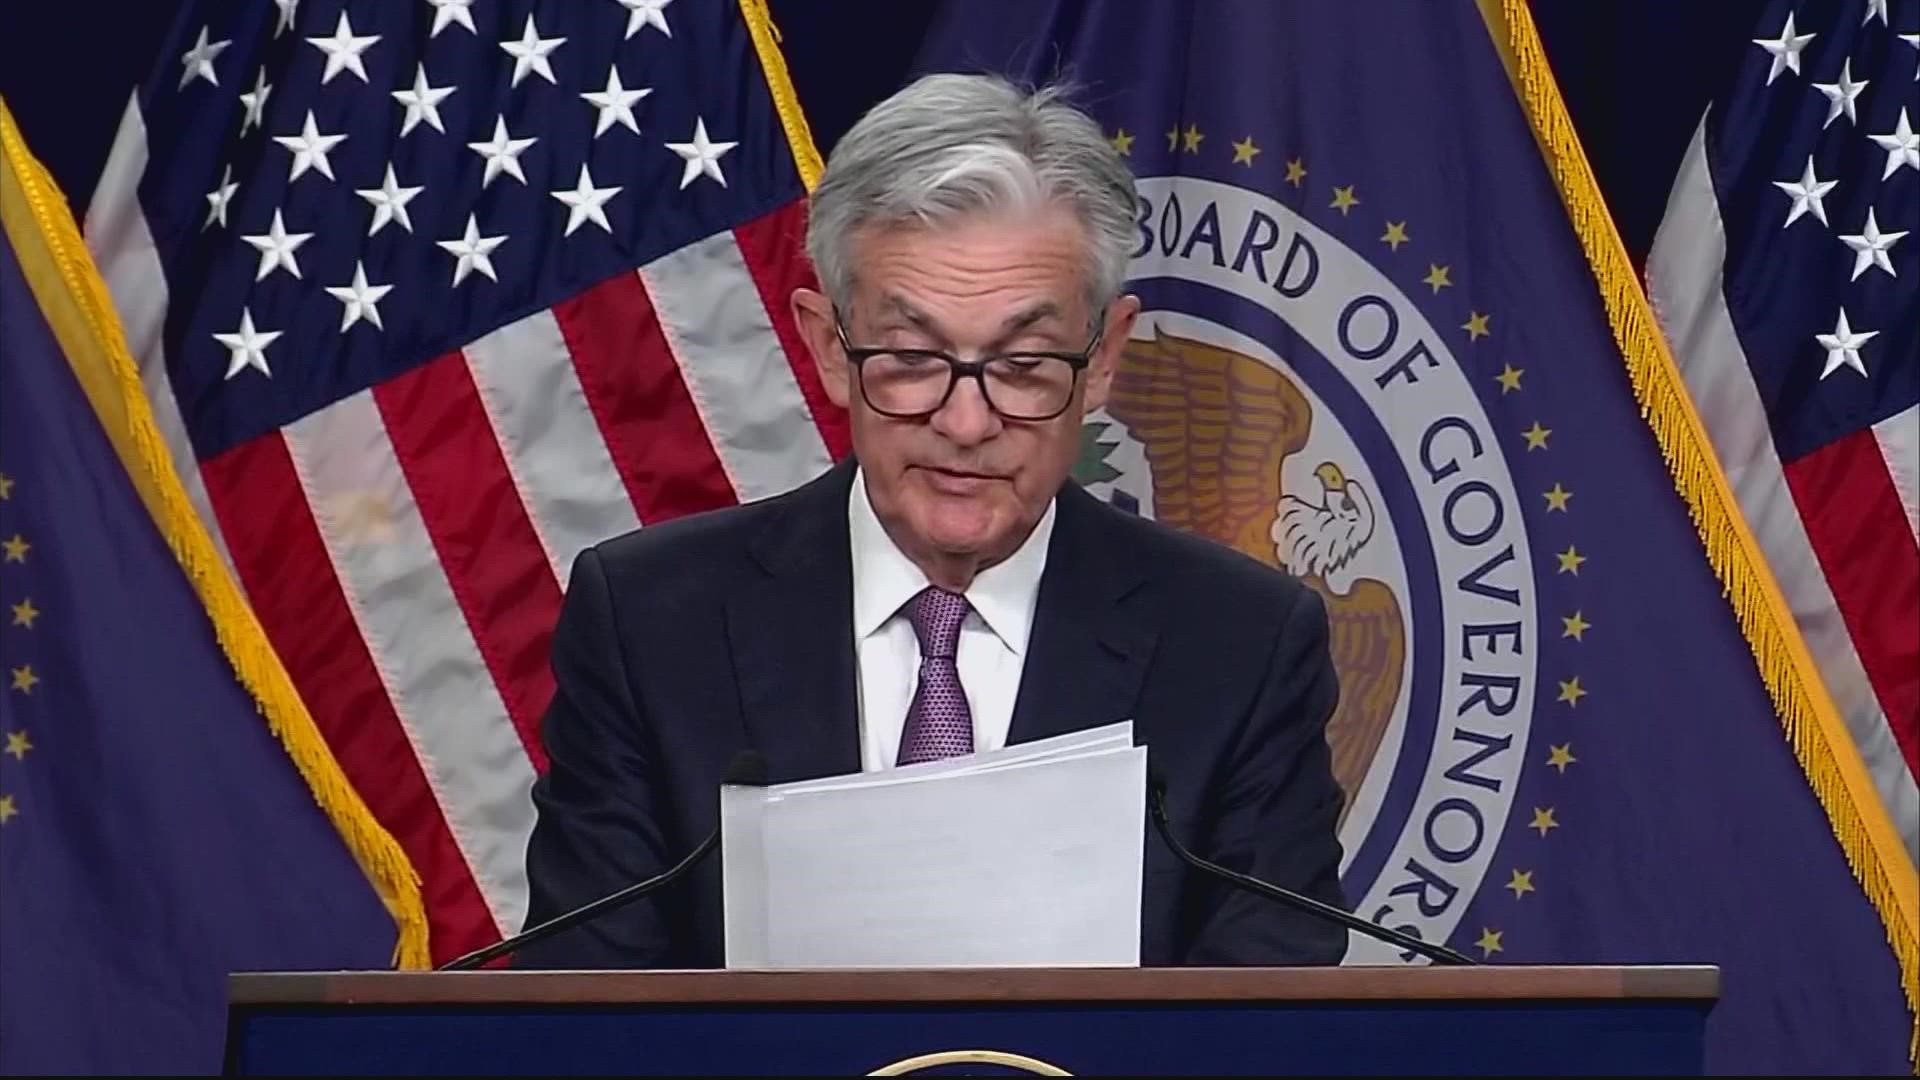 The Federal Reserve sending a message of what some describe as quote 'tough love'